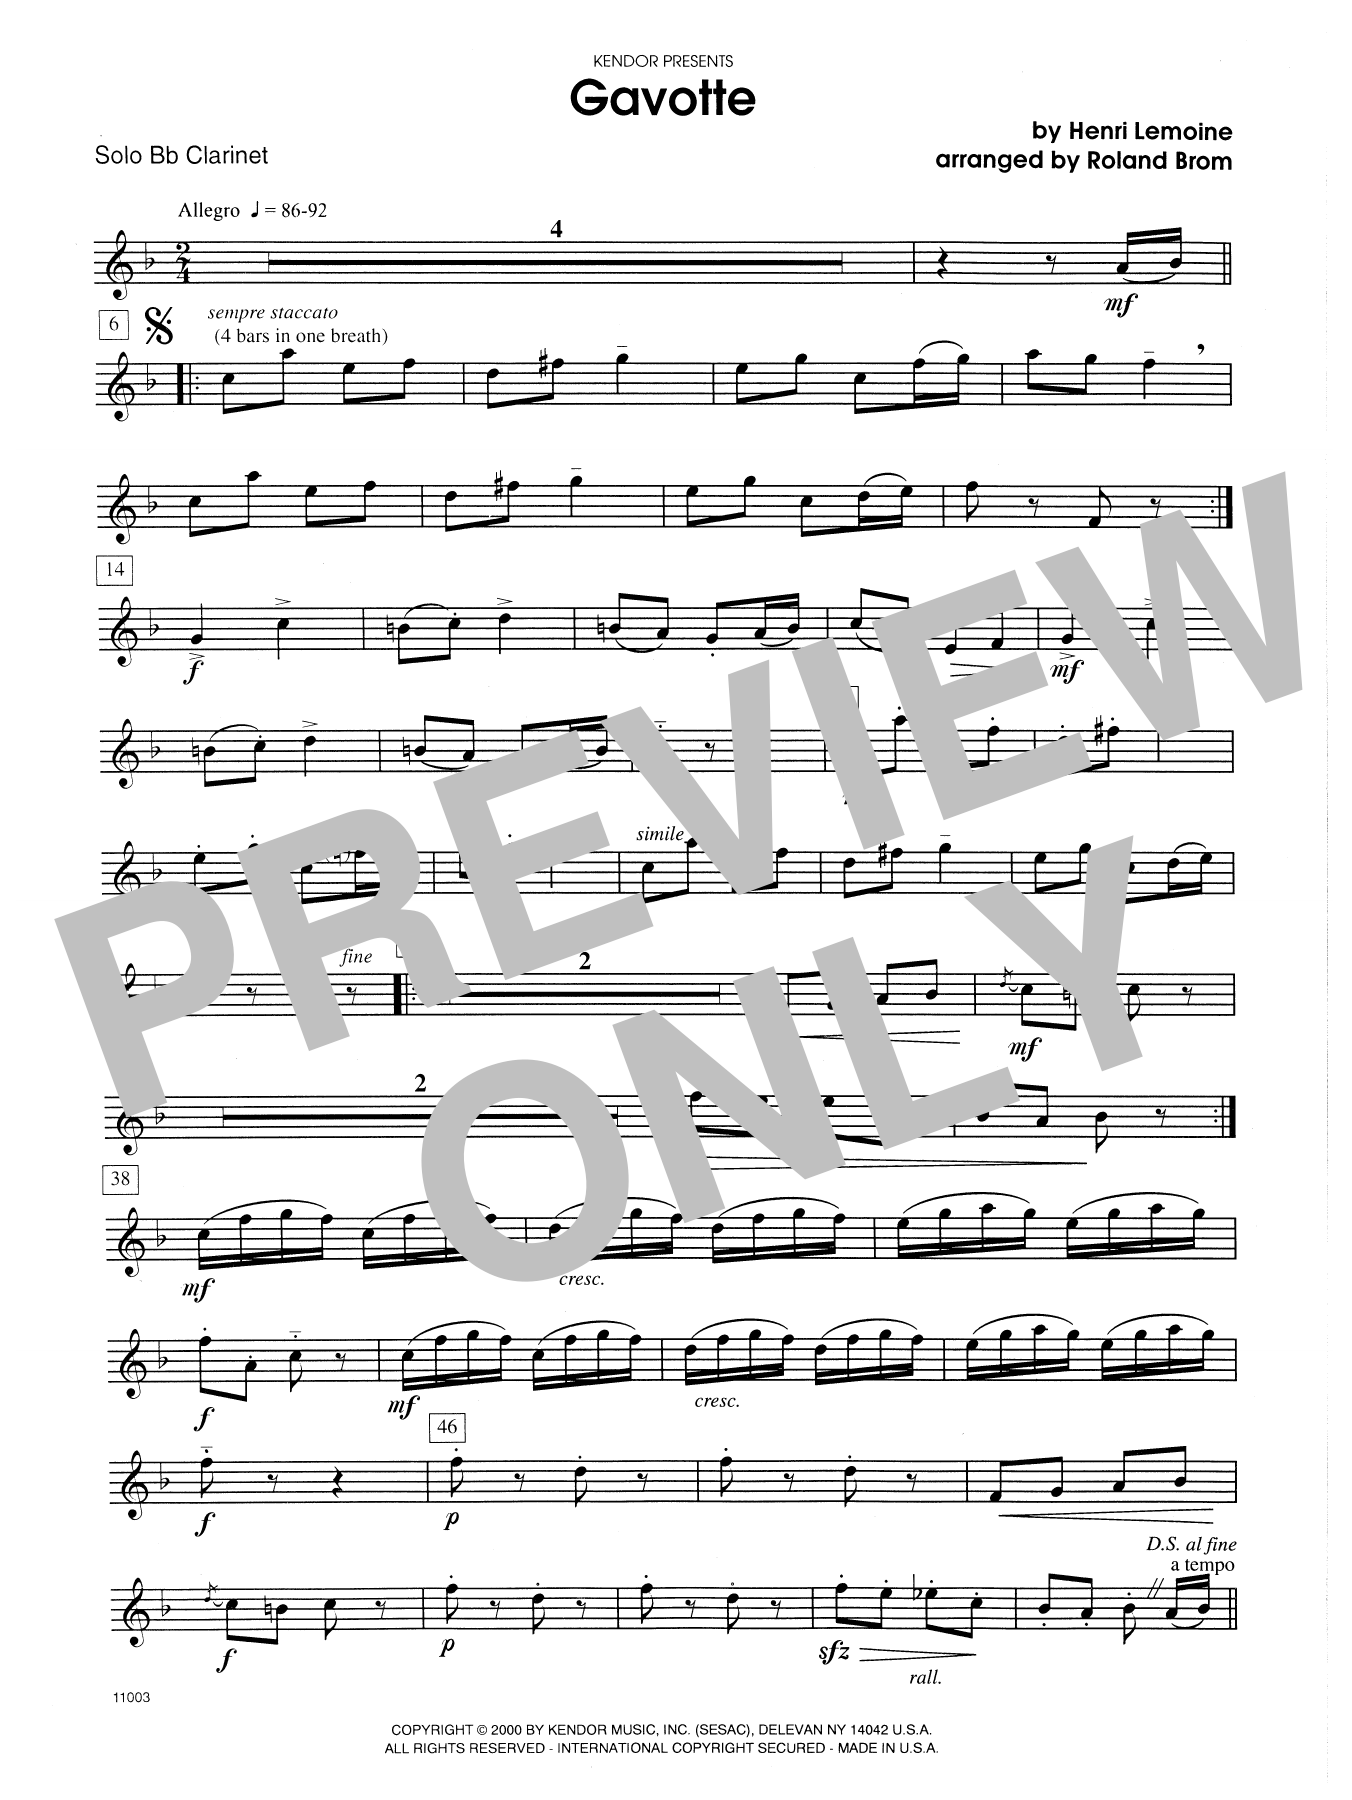 Download Brom Gavotte - Solo Bb Clarinet Sheet Music